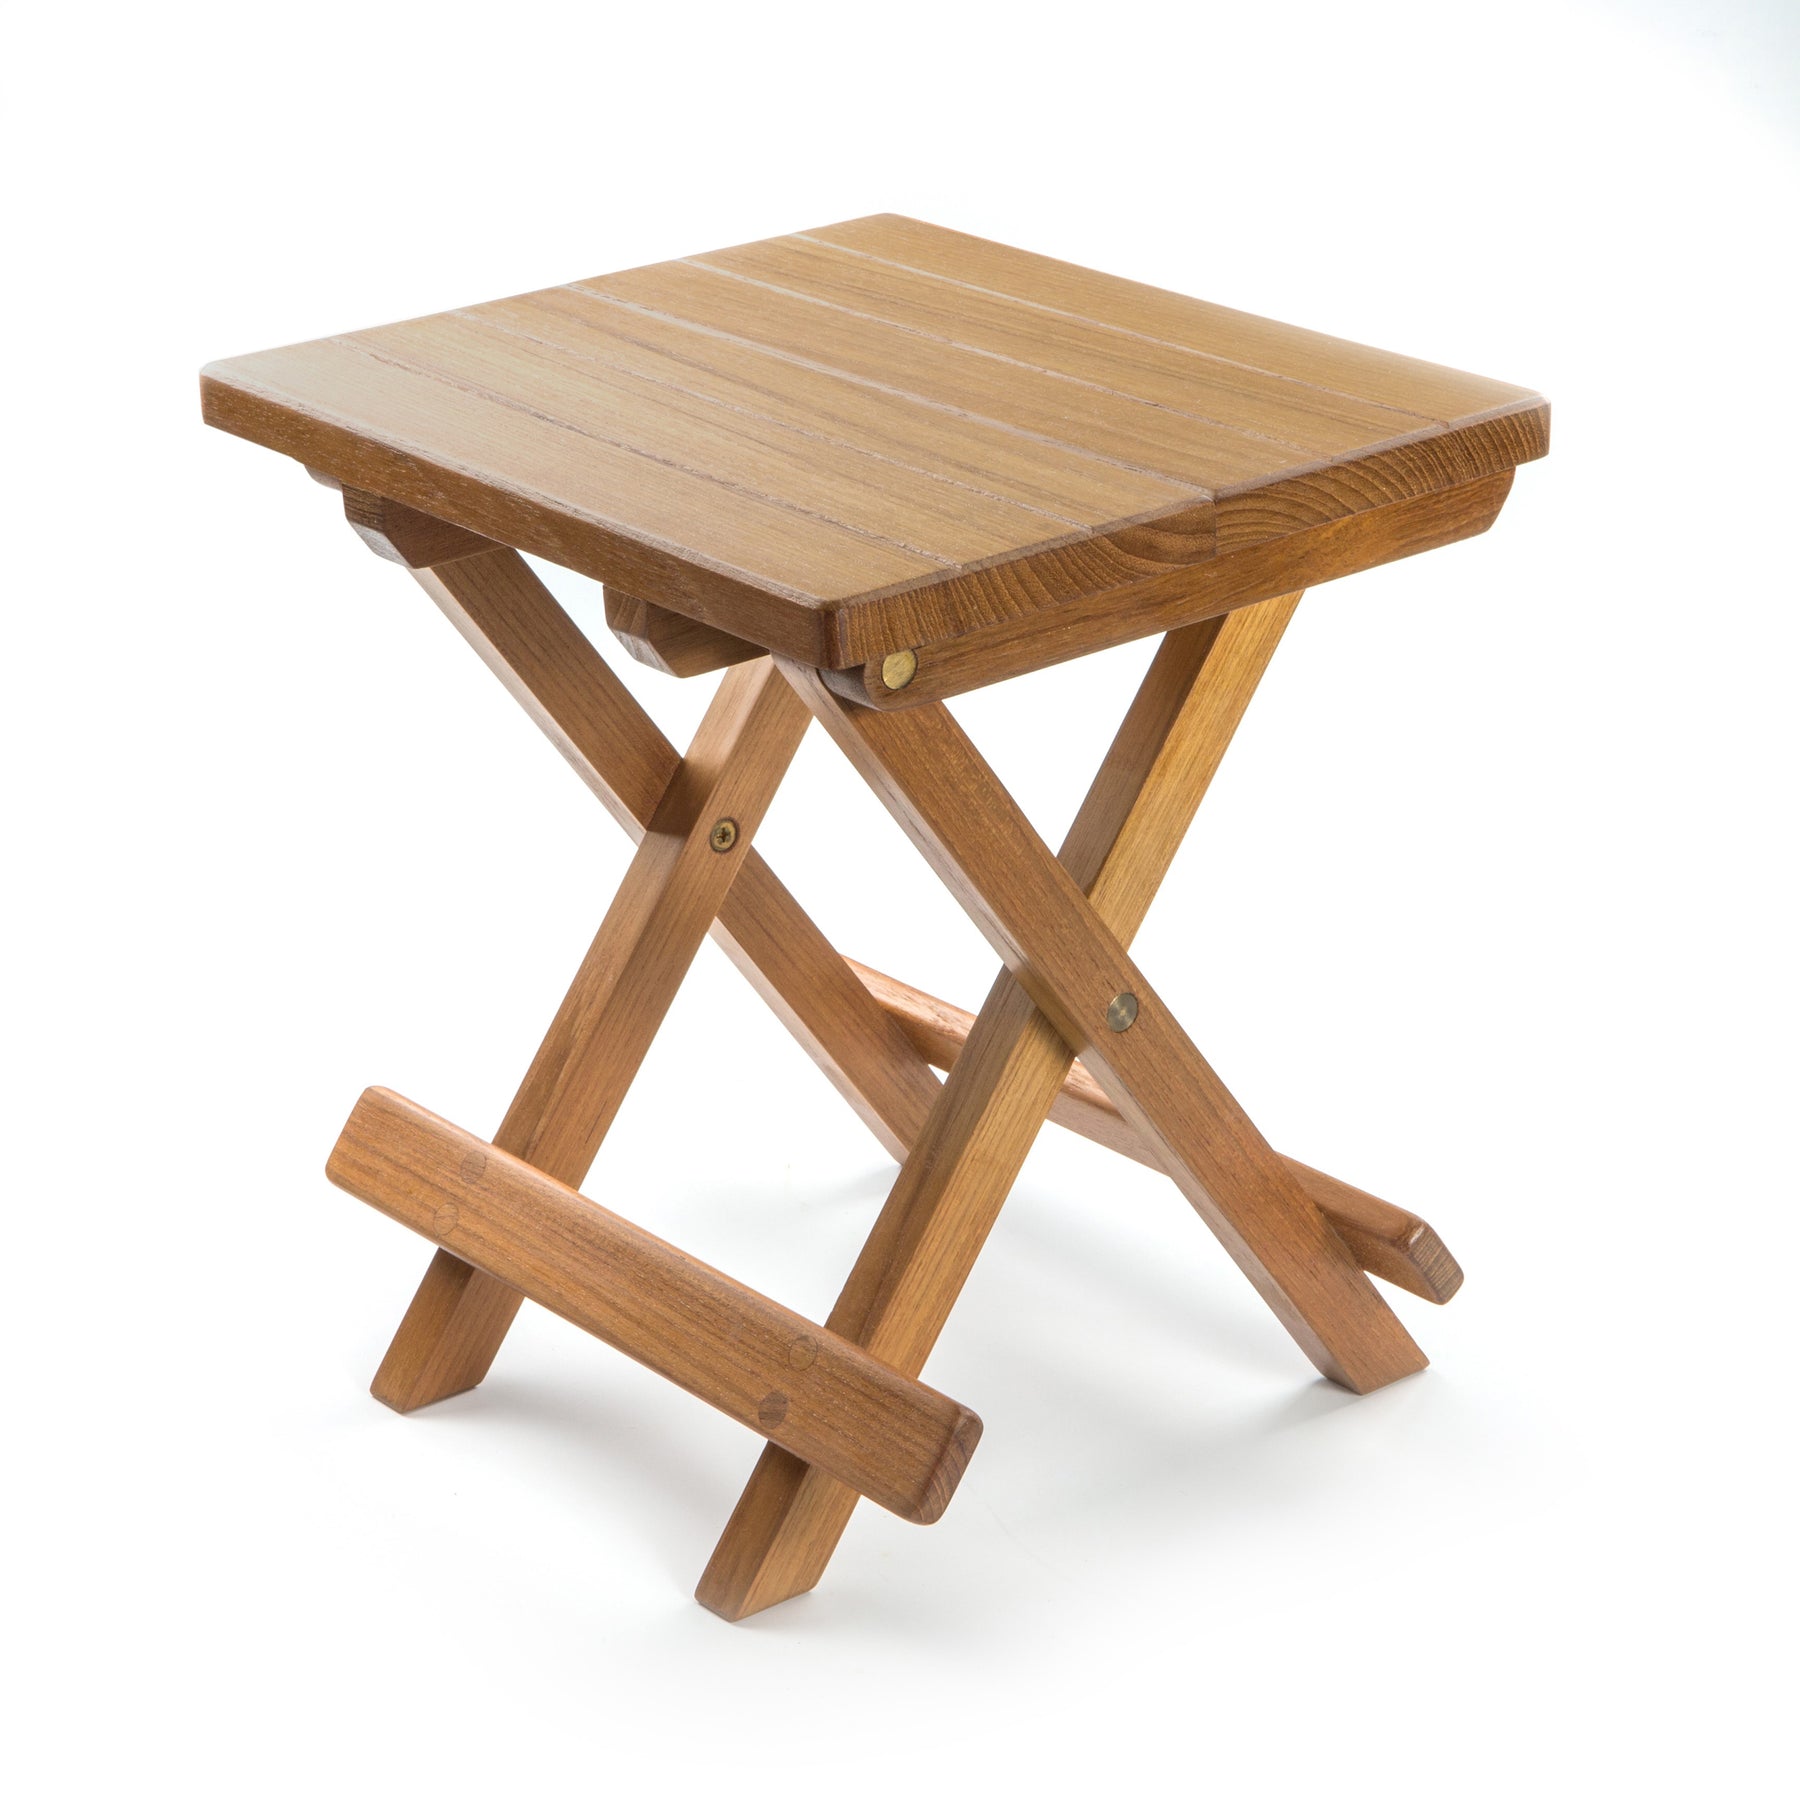 Grooved Top Fold Away Table - 60034